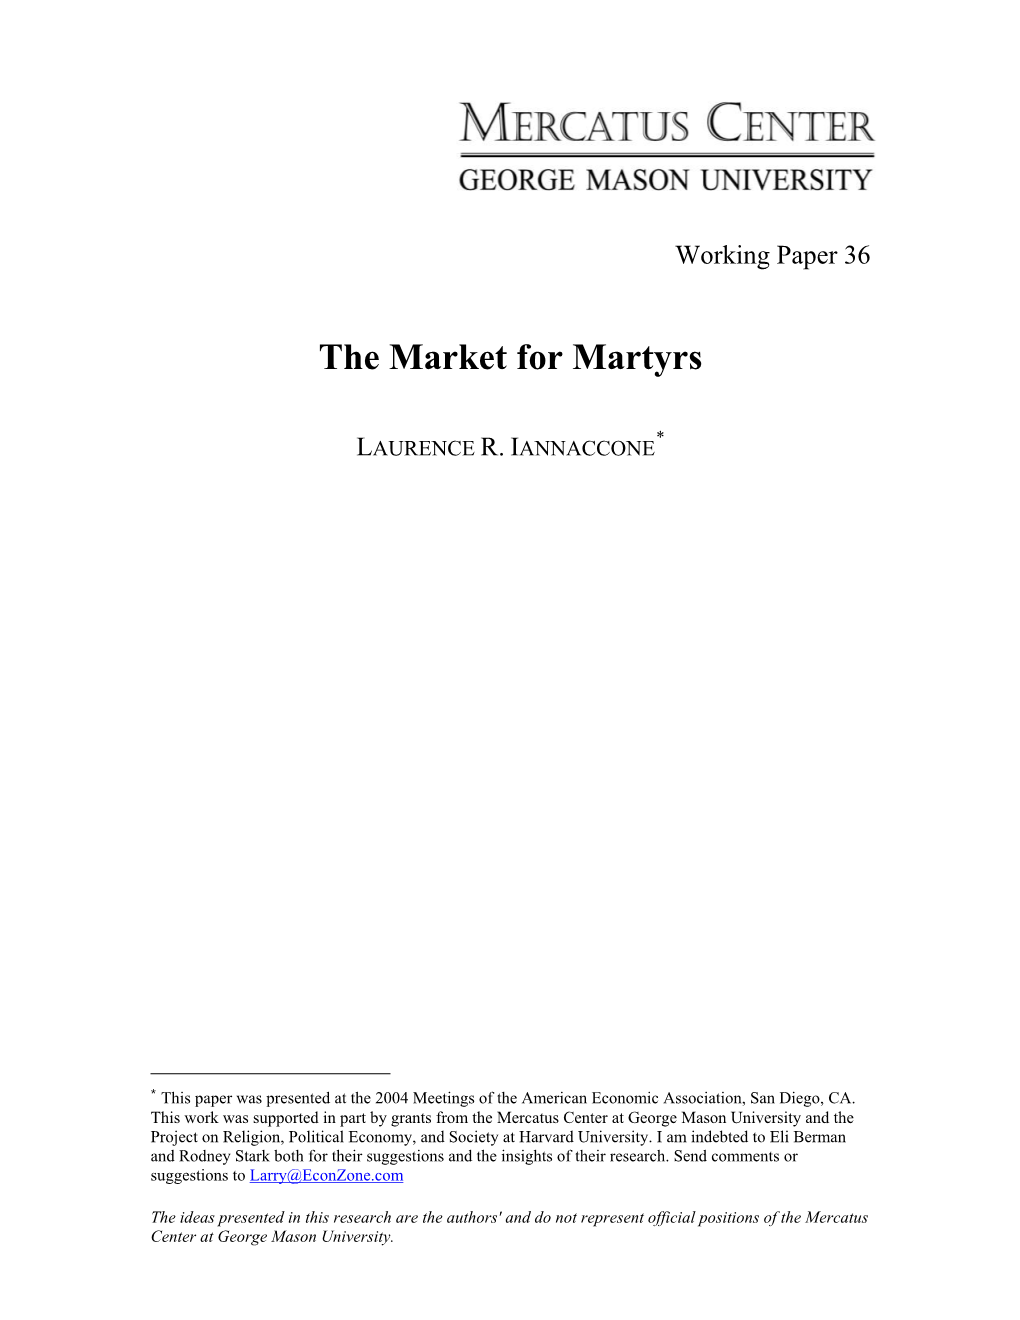 The Market for Martyrs